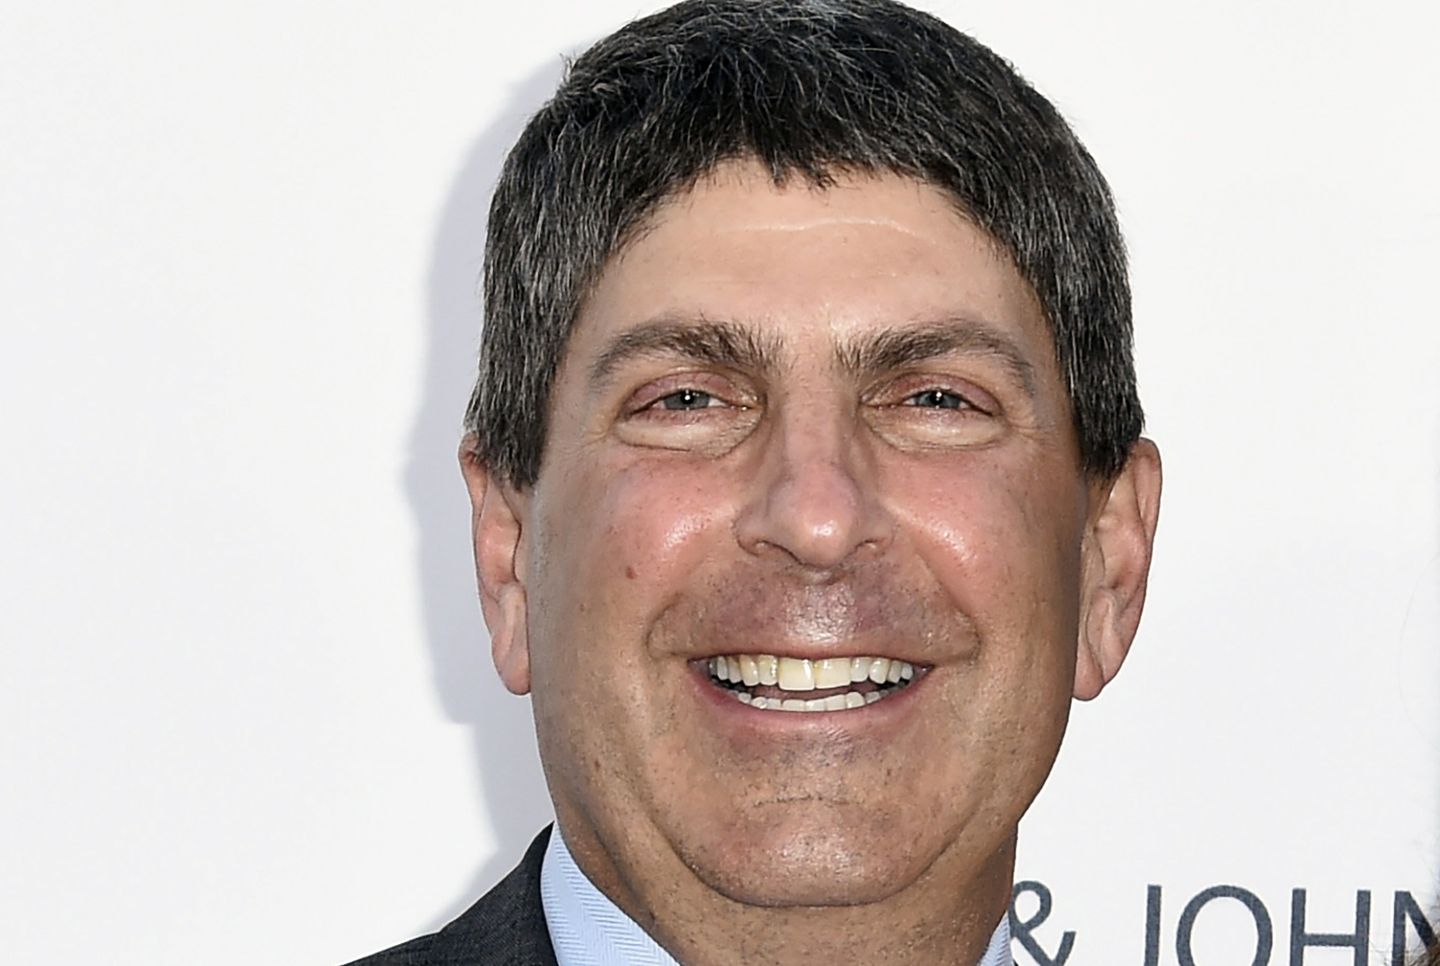 NBCUniversal CEO departs over 'inappropriate conduct'